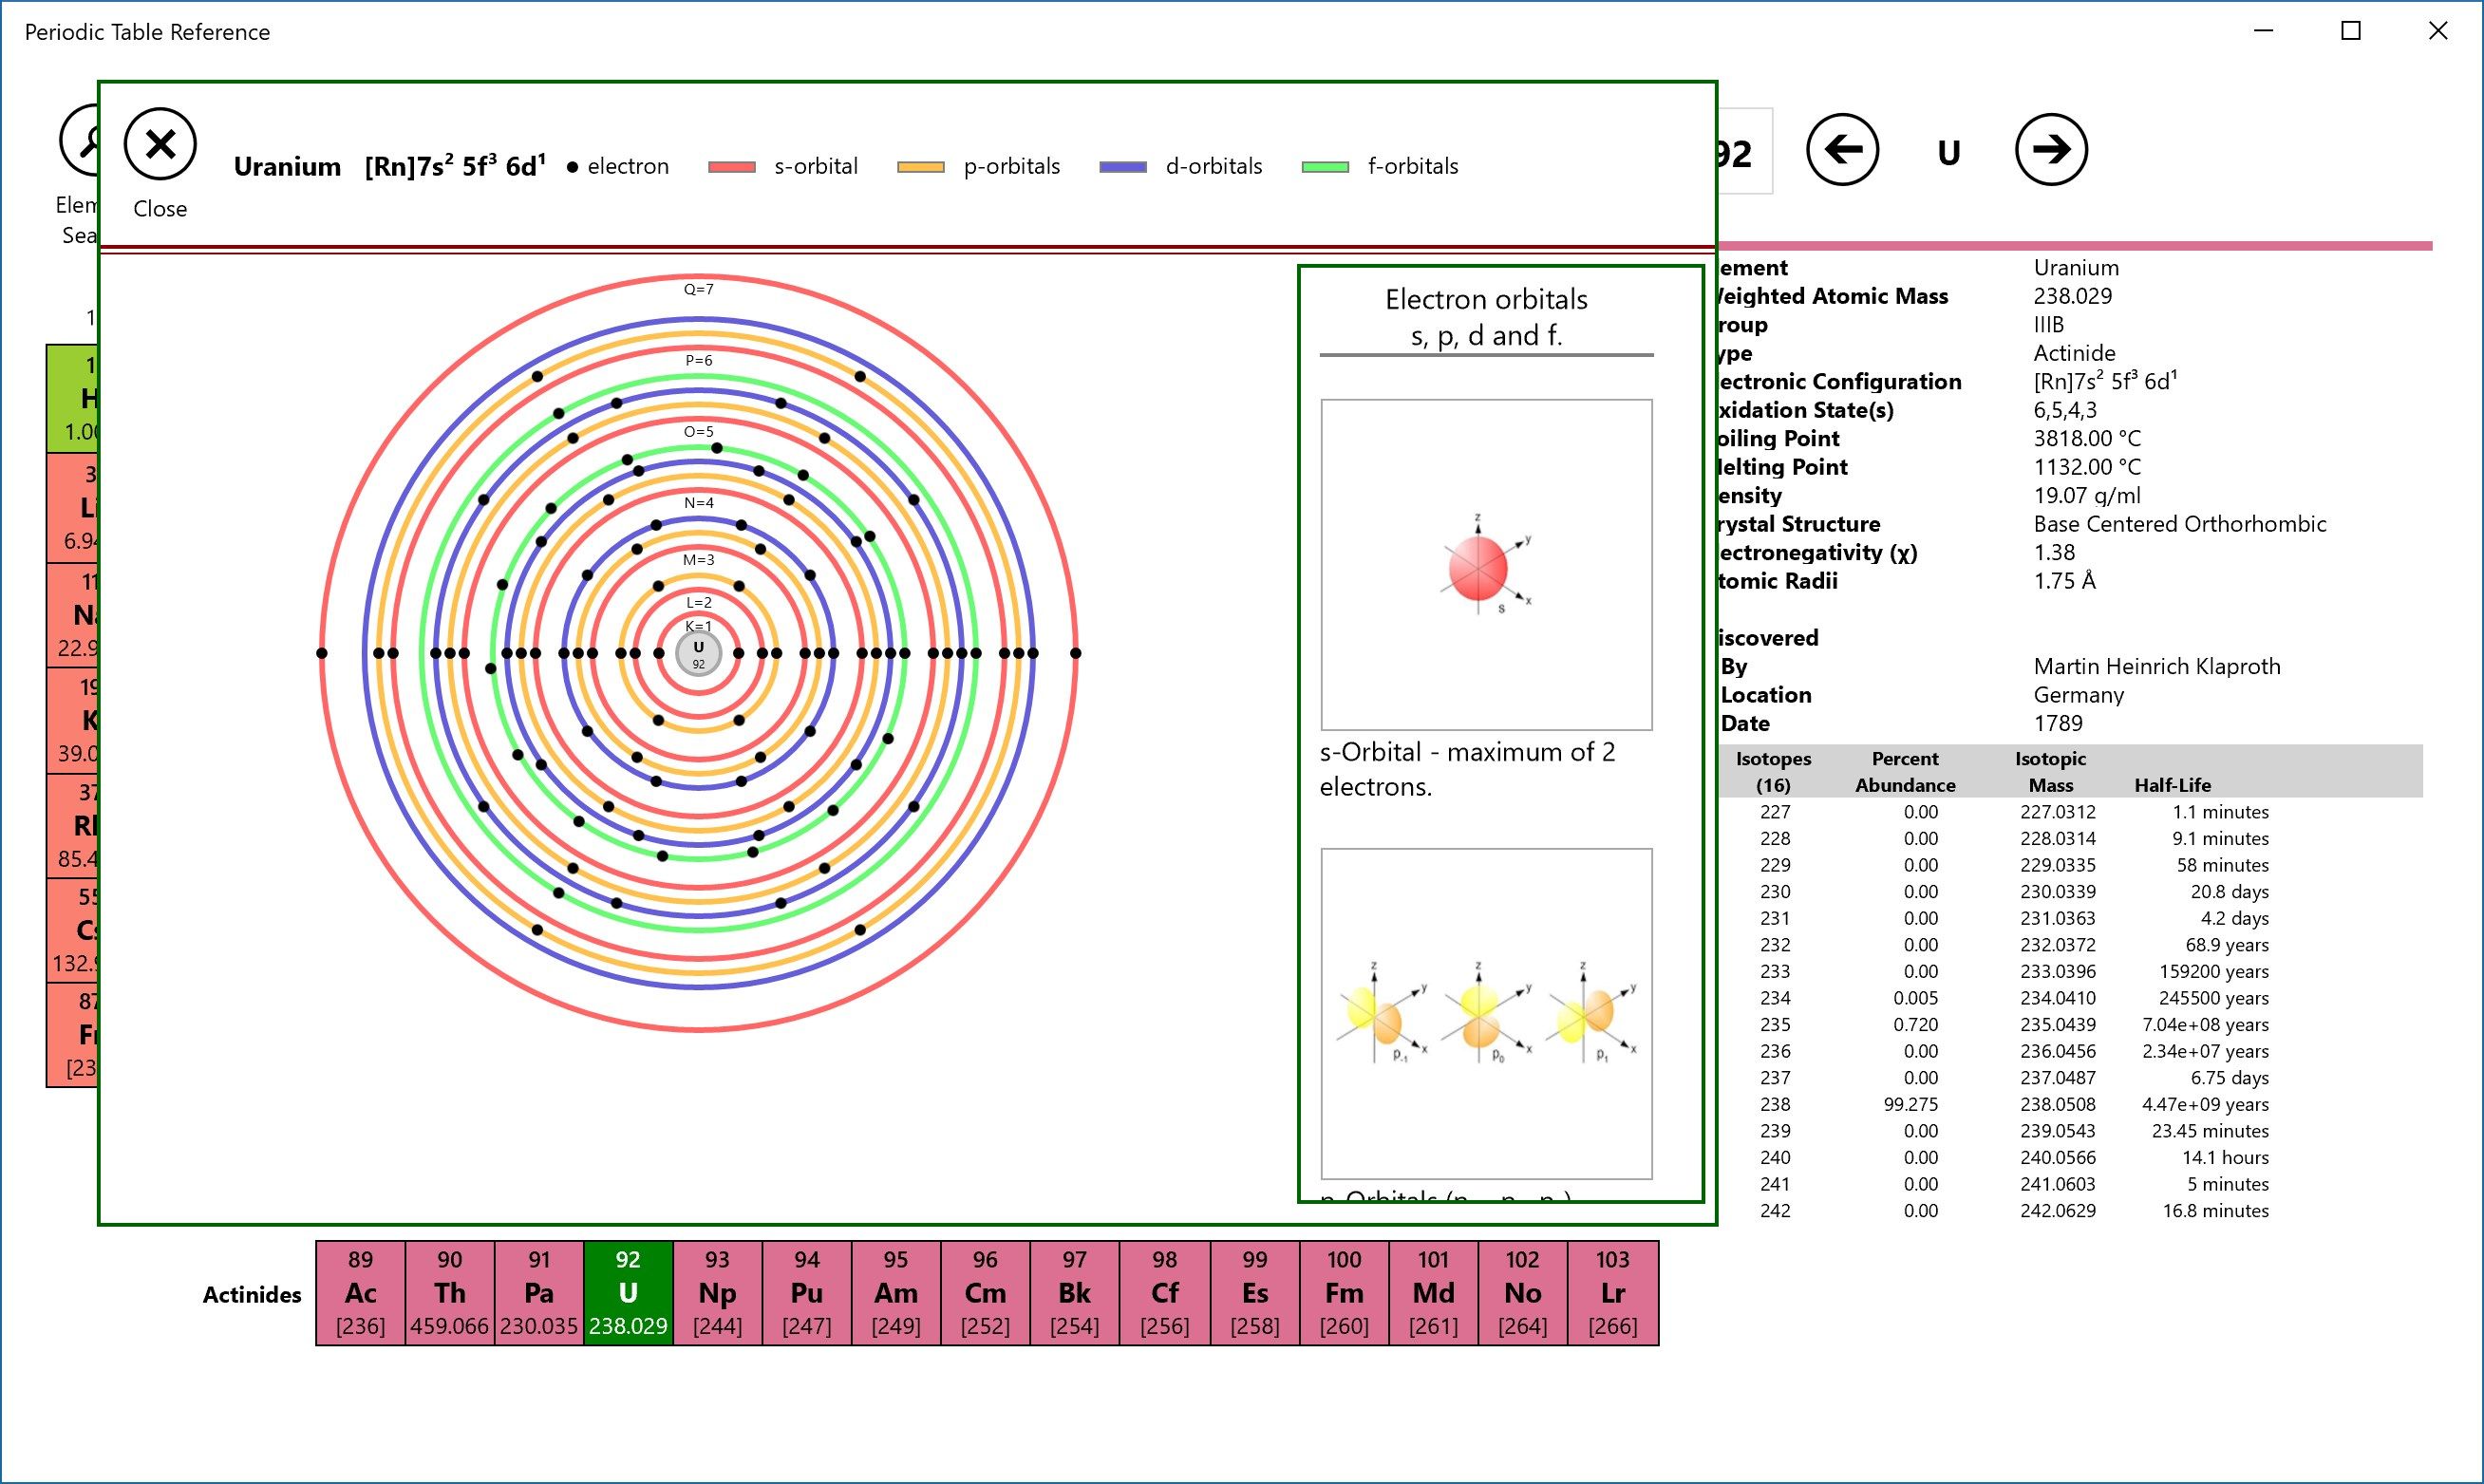 This view shows the electron distribution (e-view) in their shells and orbitals. On the right side is a panel that shows pictures of the various orbital types (s, p, d and f).